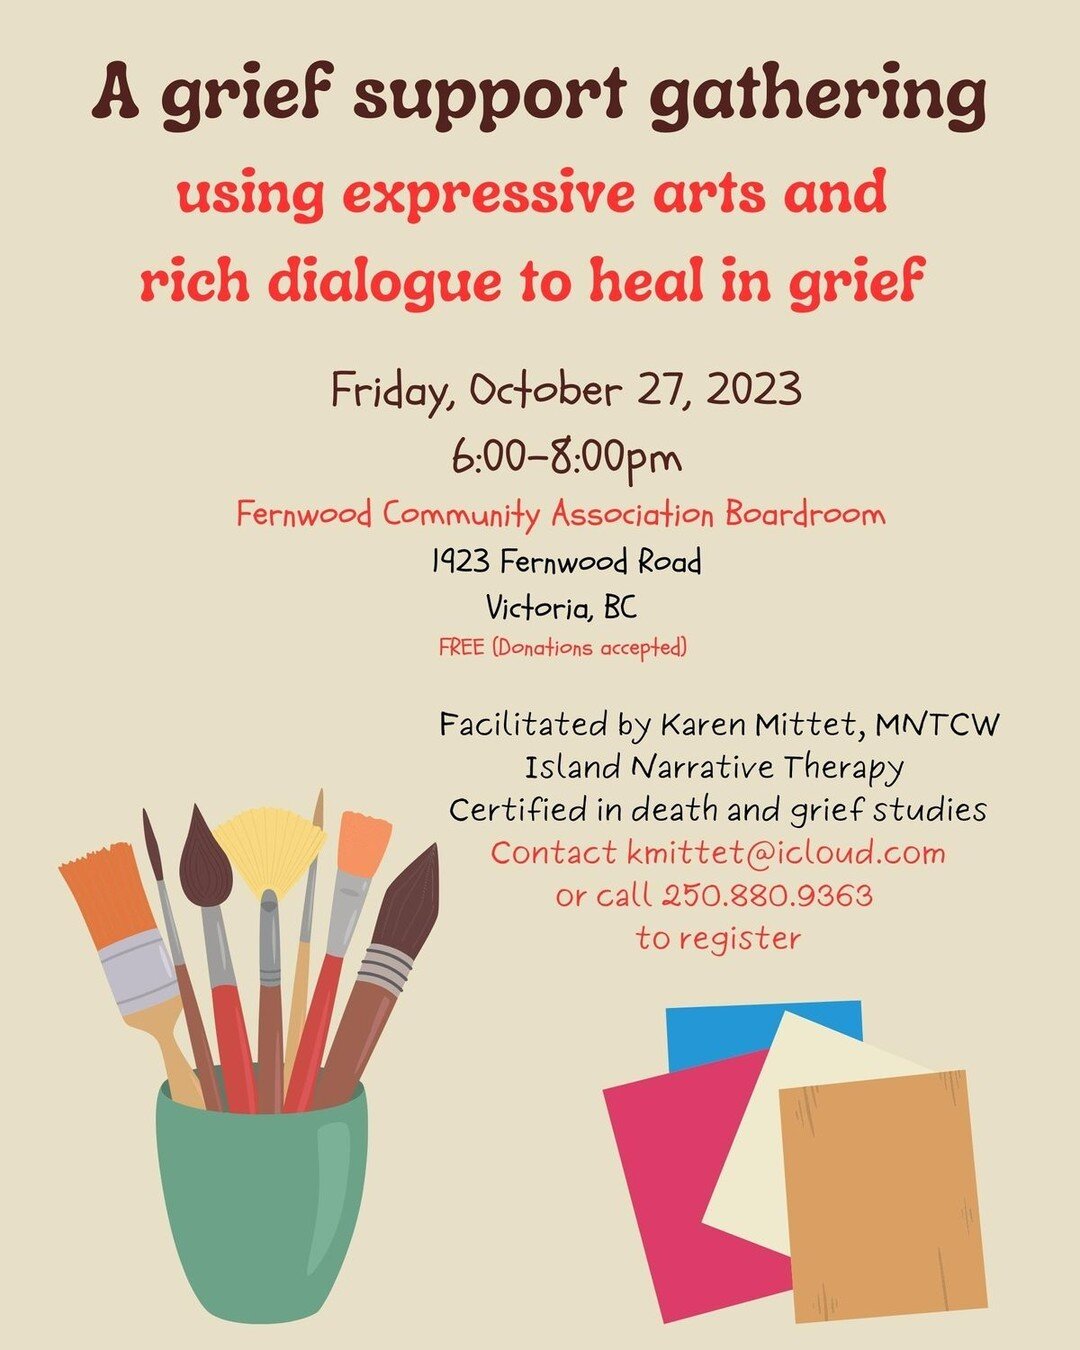 Join a Grief Support Group that begins with an expressive art activity to help us reflect on and understand our grieving experience from a different landscape.  Please pre-register as this is an intimate gathering.
#griefsupport #griefgathering #grie